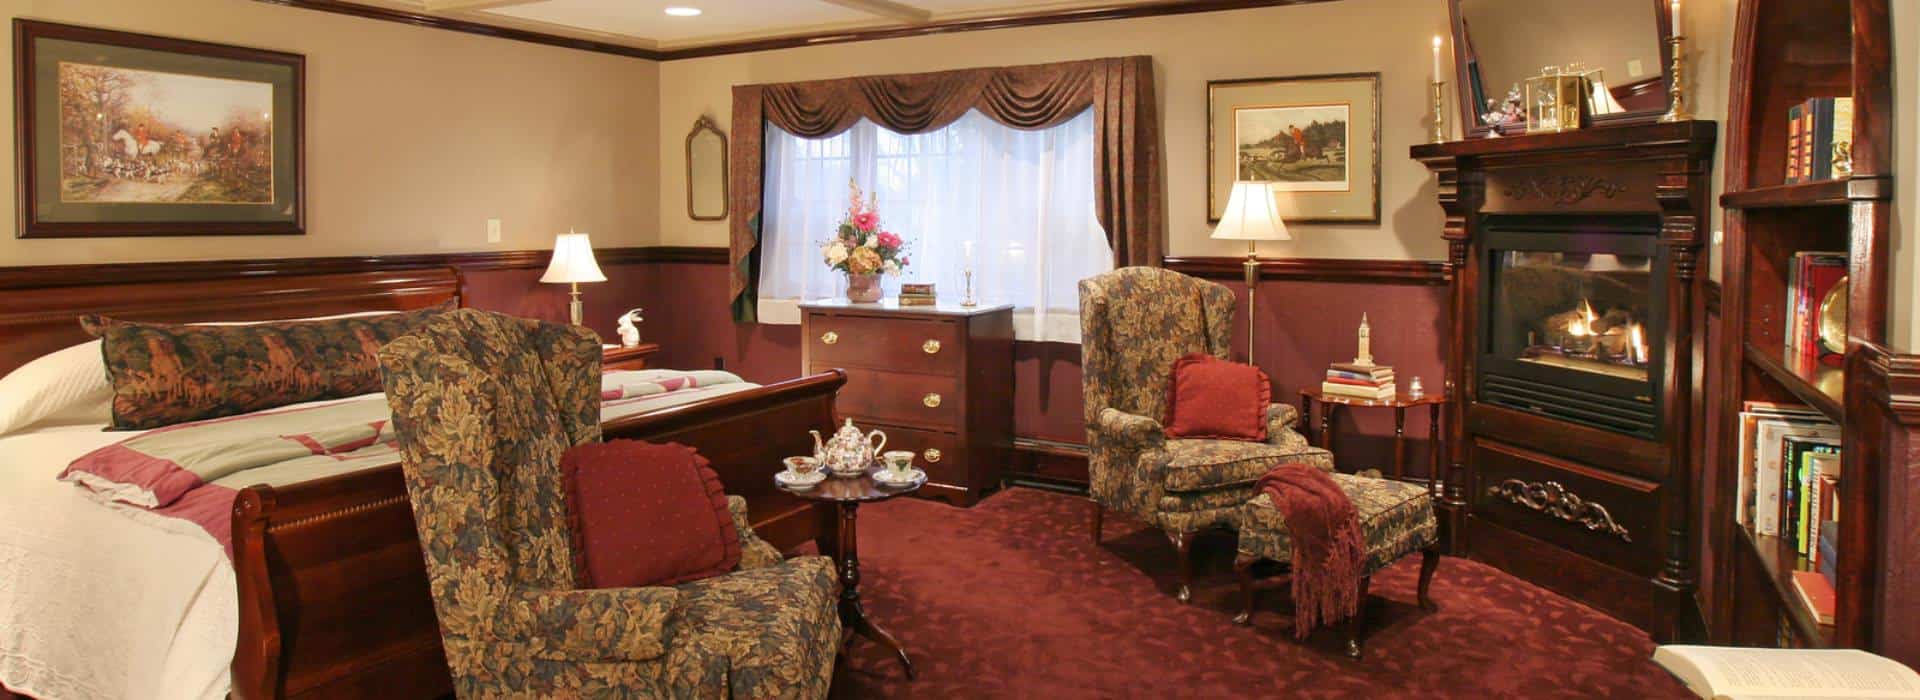 Large bedroom suite with dark wooden sleigh bed, white bedding, burgundy carpeting, sitting area, and fireplace